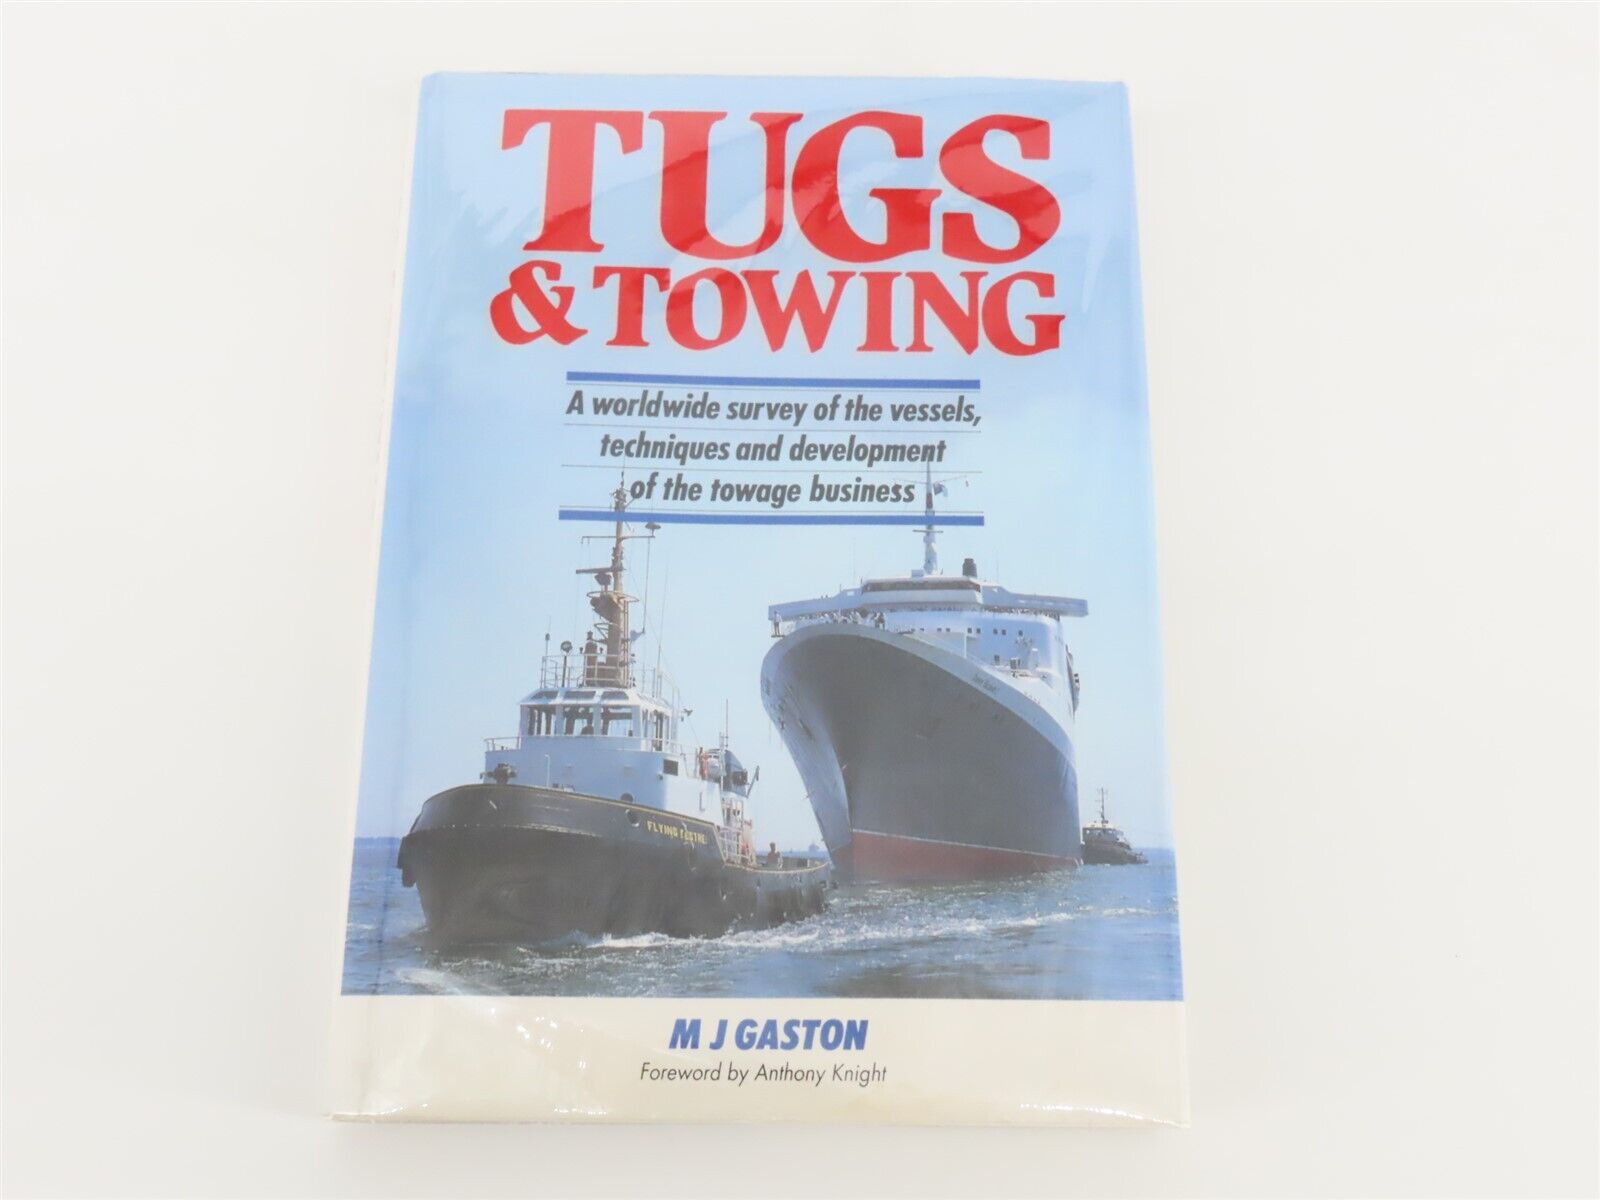 Tugs & Towing by M J Gaston ©1991 HC Book